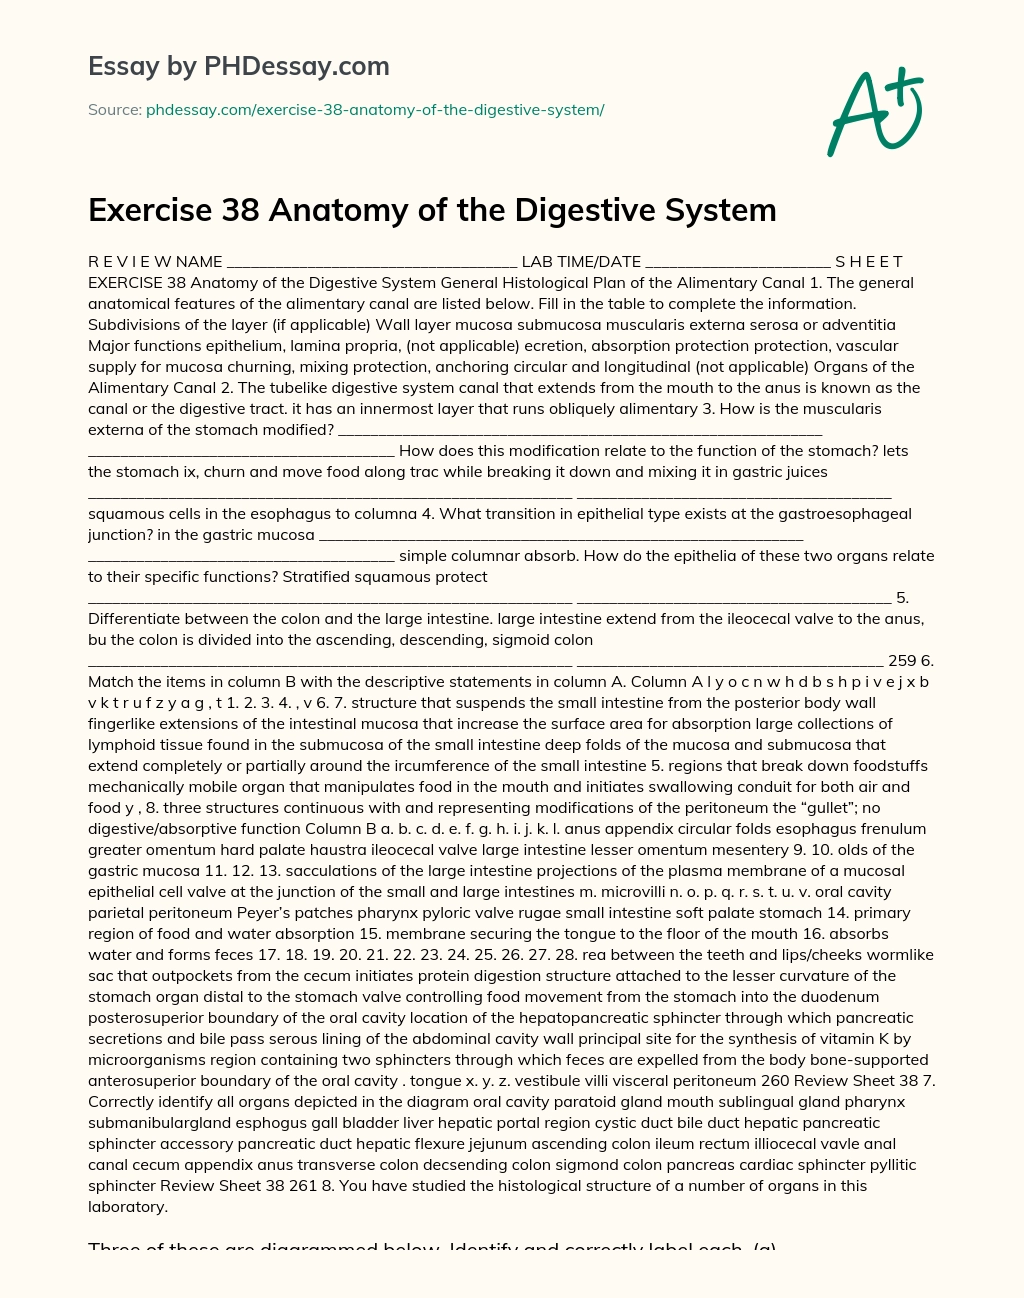 Exercise 38 Anatomy of the Digestive System essay